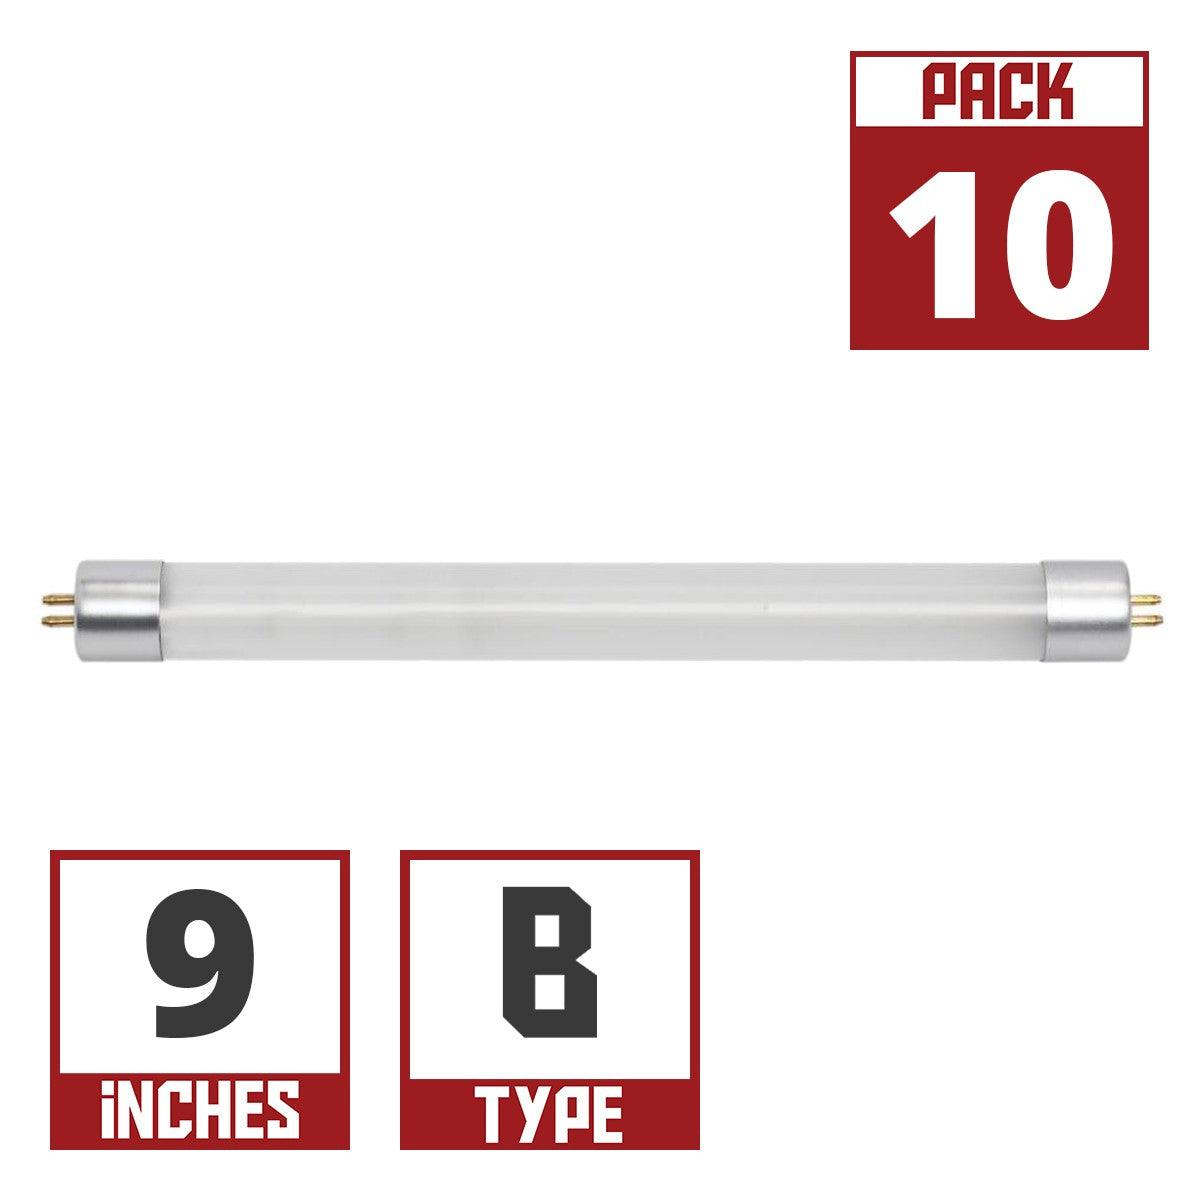 9 Inch LED mini T5 Tube, 3 Watt, 270 Lumens, 6500K, F6T5 Replacement, Ballast Bypass Double End, G5 Base (Case Of 10)